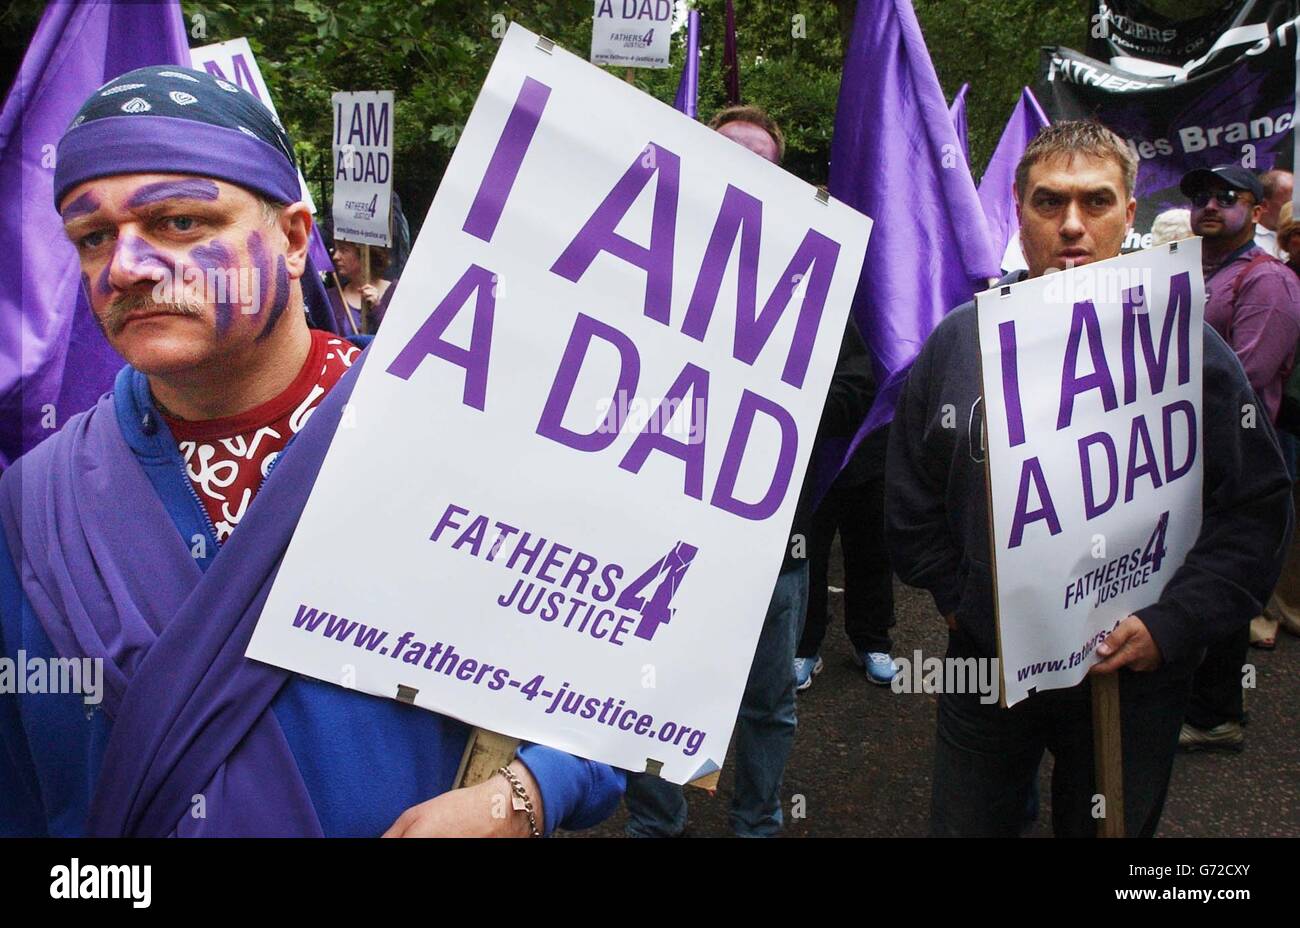 Members of 'Fathers 4 Justice' demonstrate during their march to Westminster, London where they are staging a protest for more rights for fathers. Women and children joined the march, most dressed in purple with their faces painted. The procession was headed by a giant purple helium balloon with the 'super heroes' bus following, which pumped out loud music. Stock Photo